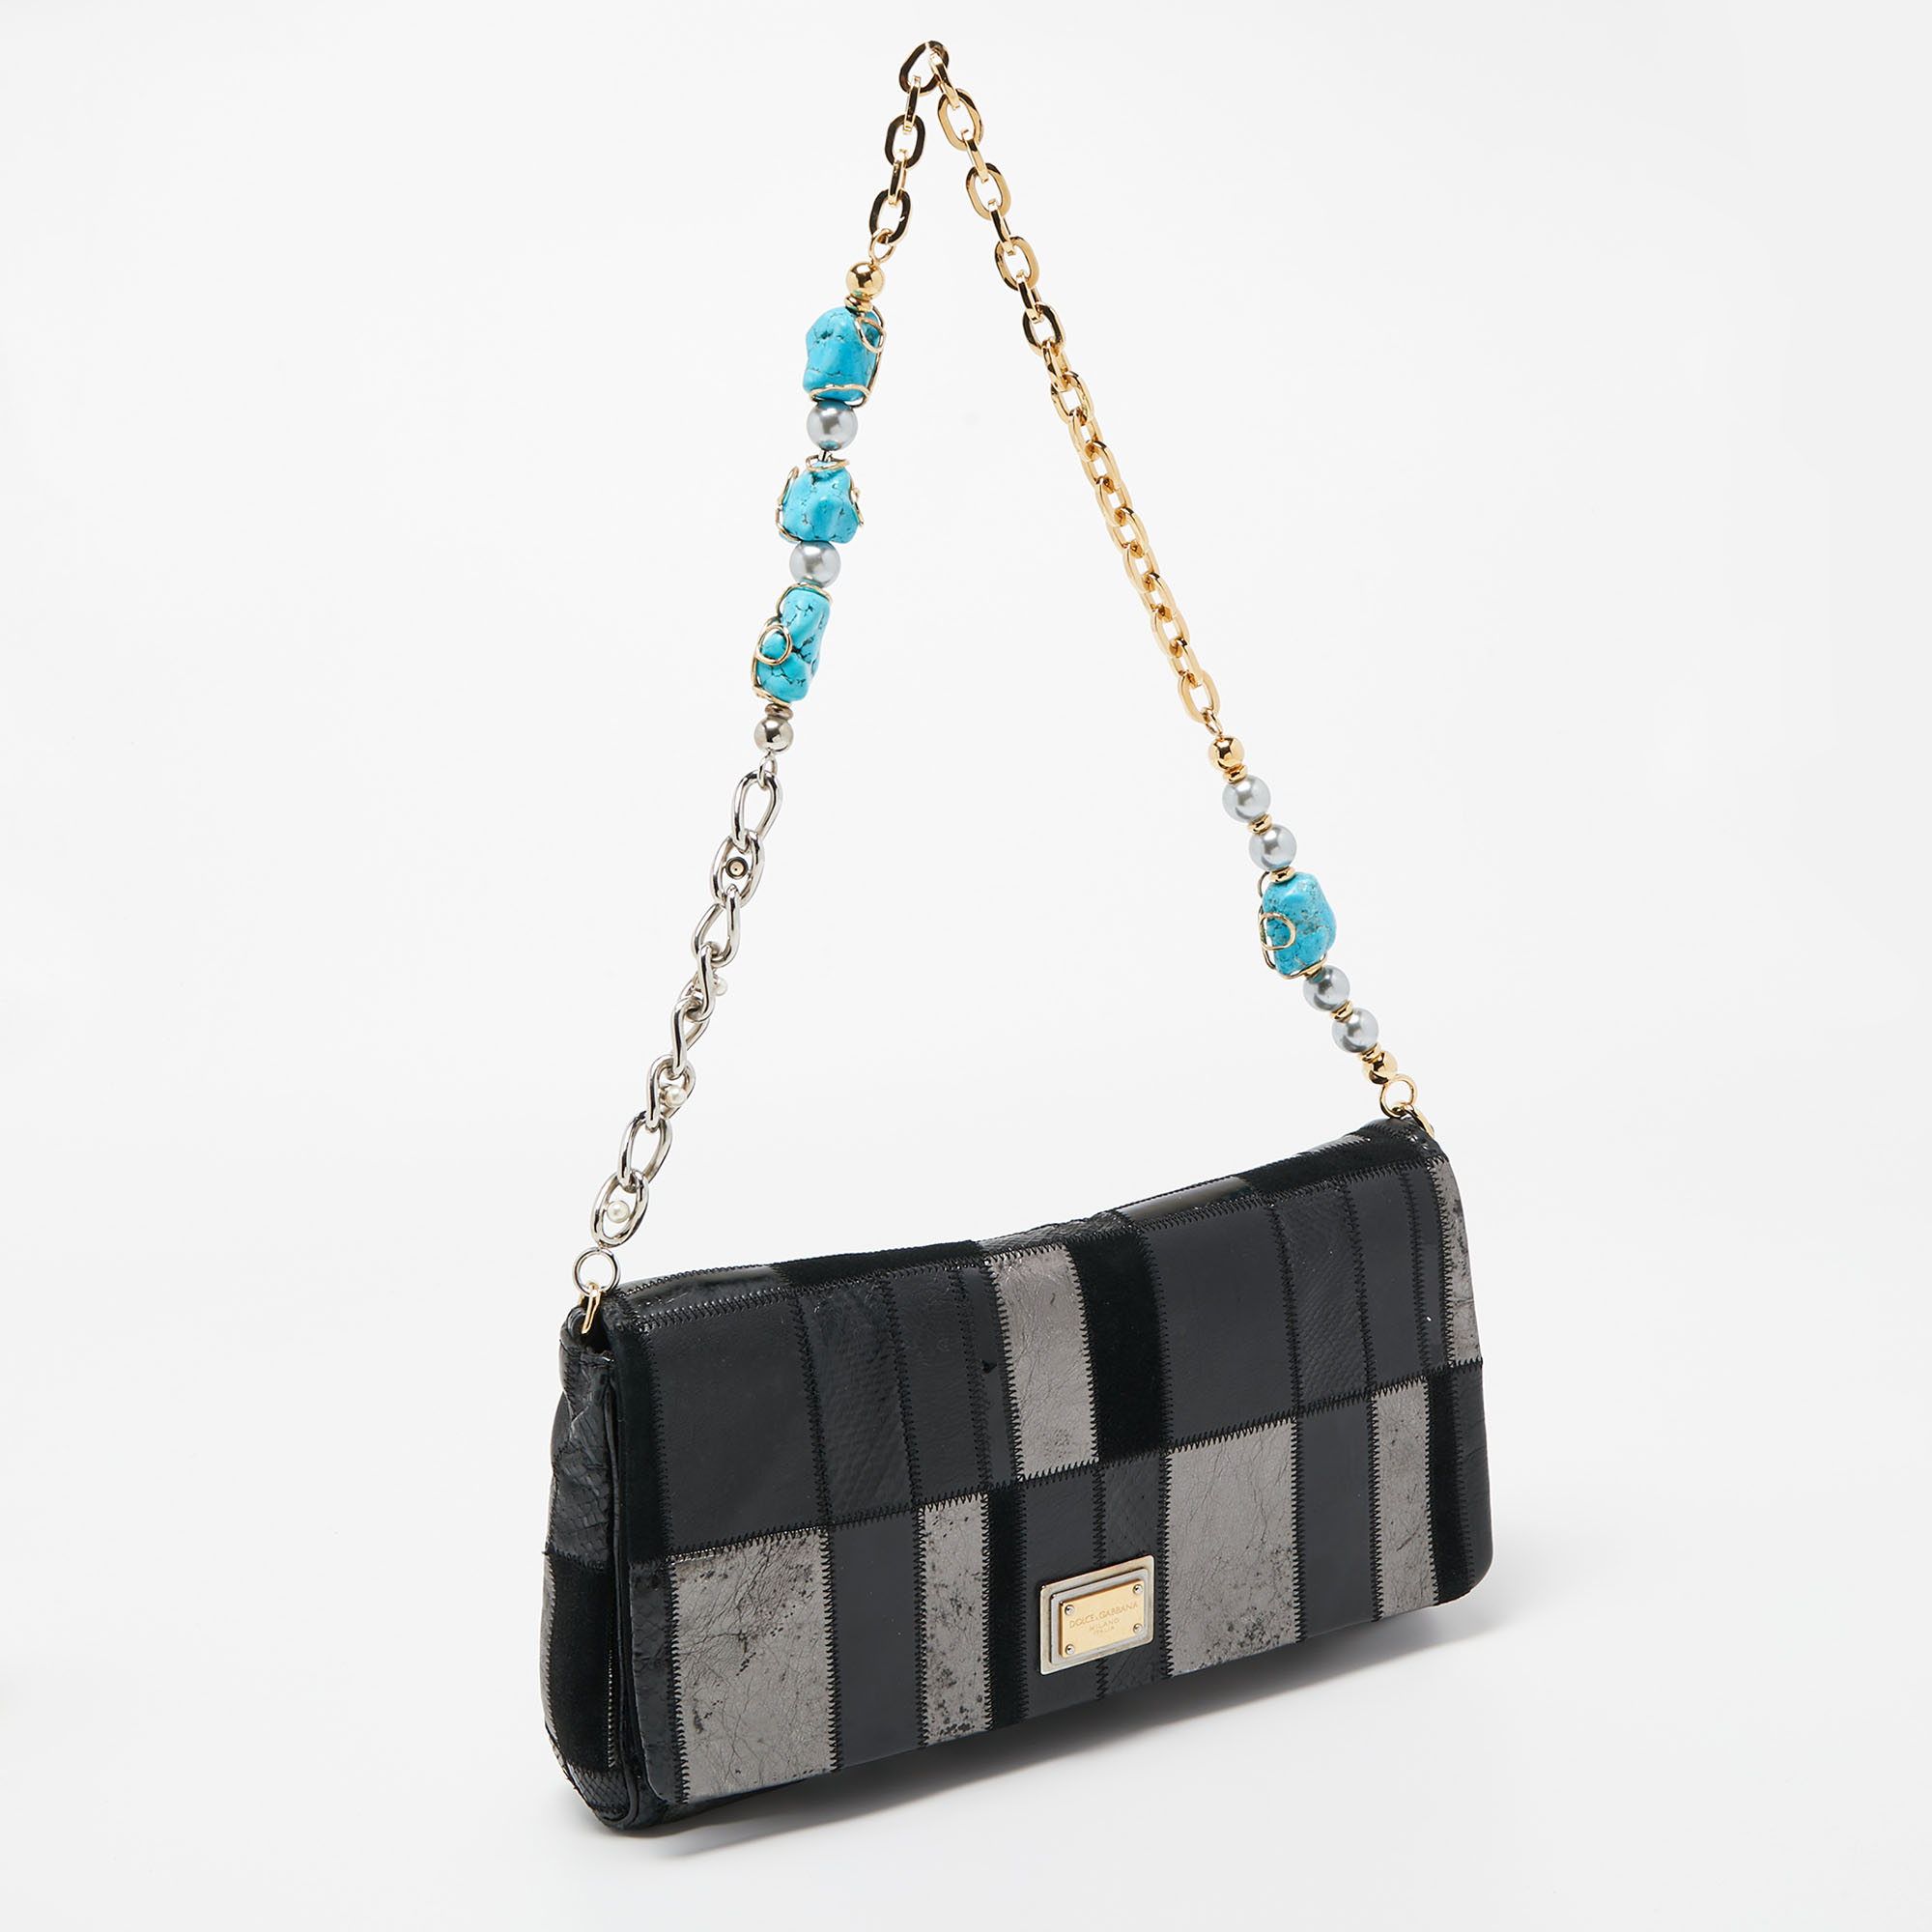 Dolce & Gabbana Black/Grey Mixed Leather And Snakeskin Patchwork Chain Bag